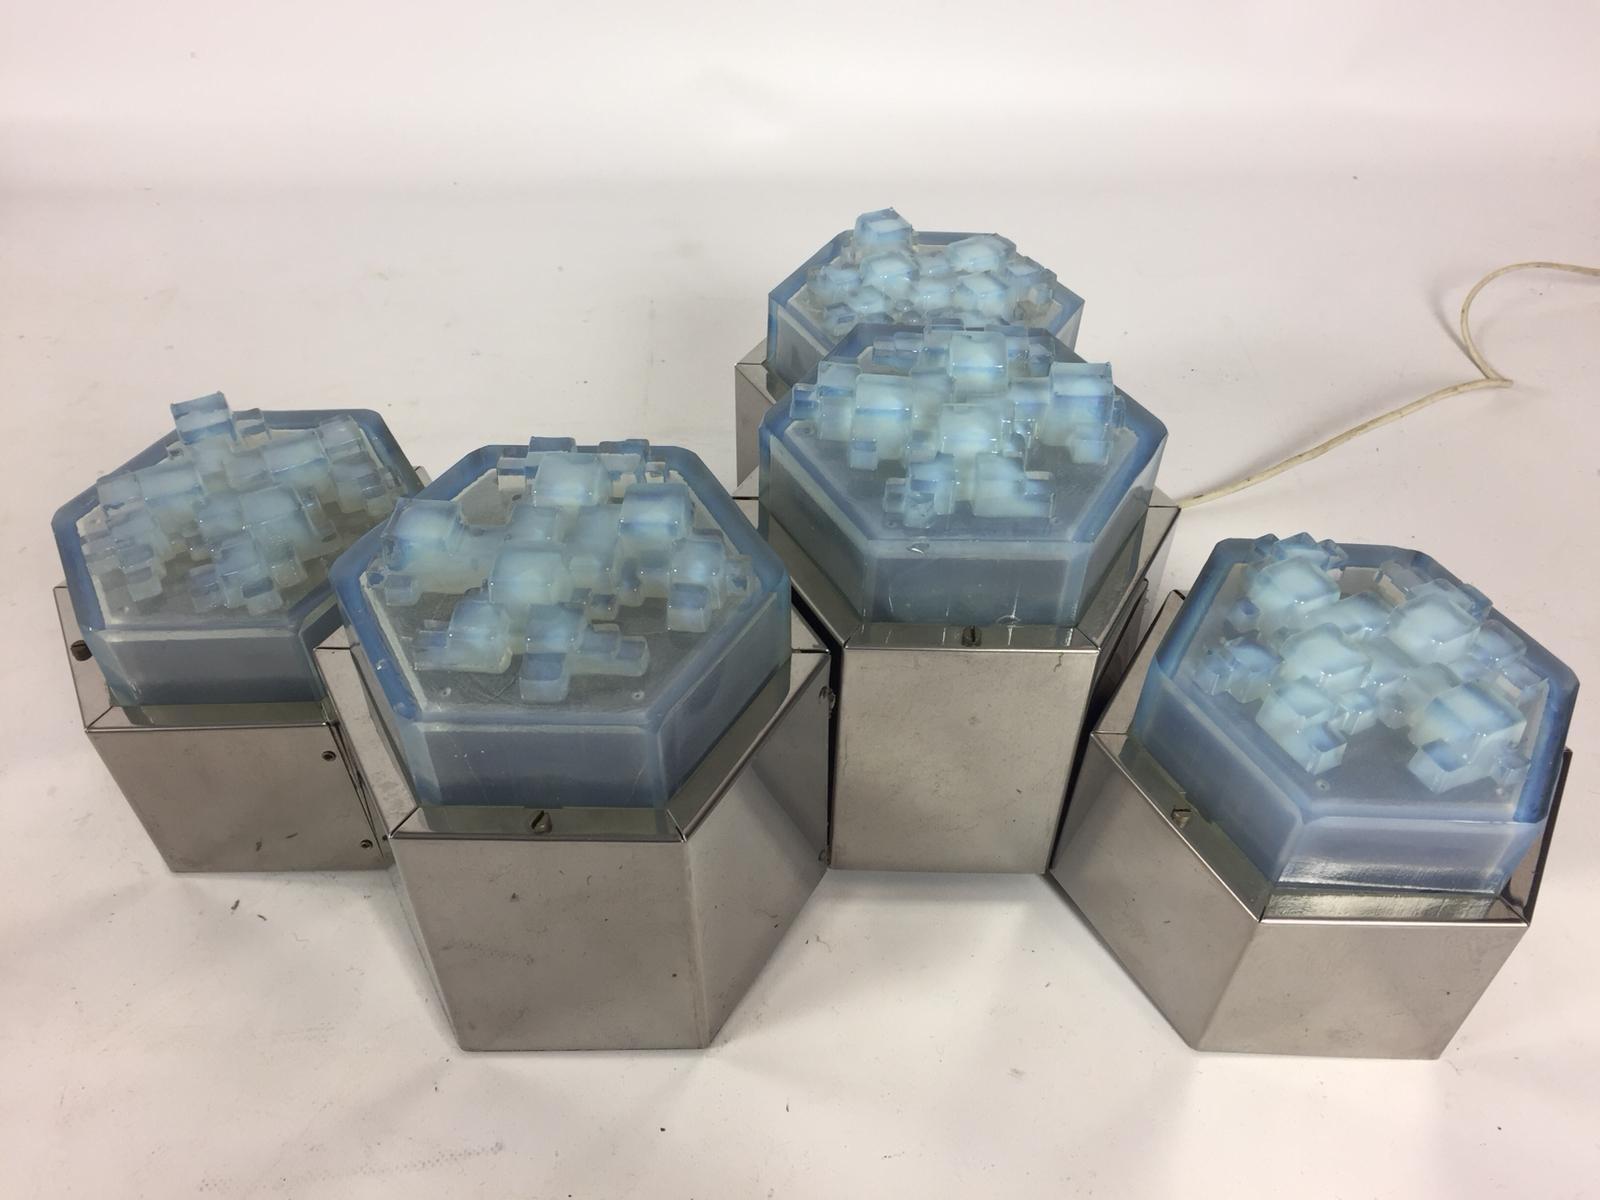 Stunning Poliarte glass and chrome hexagon flush mounts. The blue glass has a geometric 3-dimensional detail. Chrome fixture with some patina. Newly re-wired. Sold as a set of 5 with a different height. Can be used as a wall lamp or as a ceiling